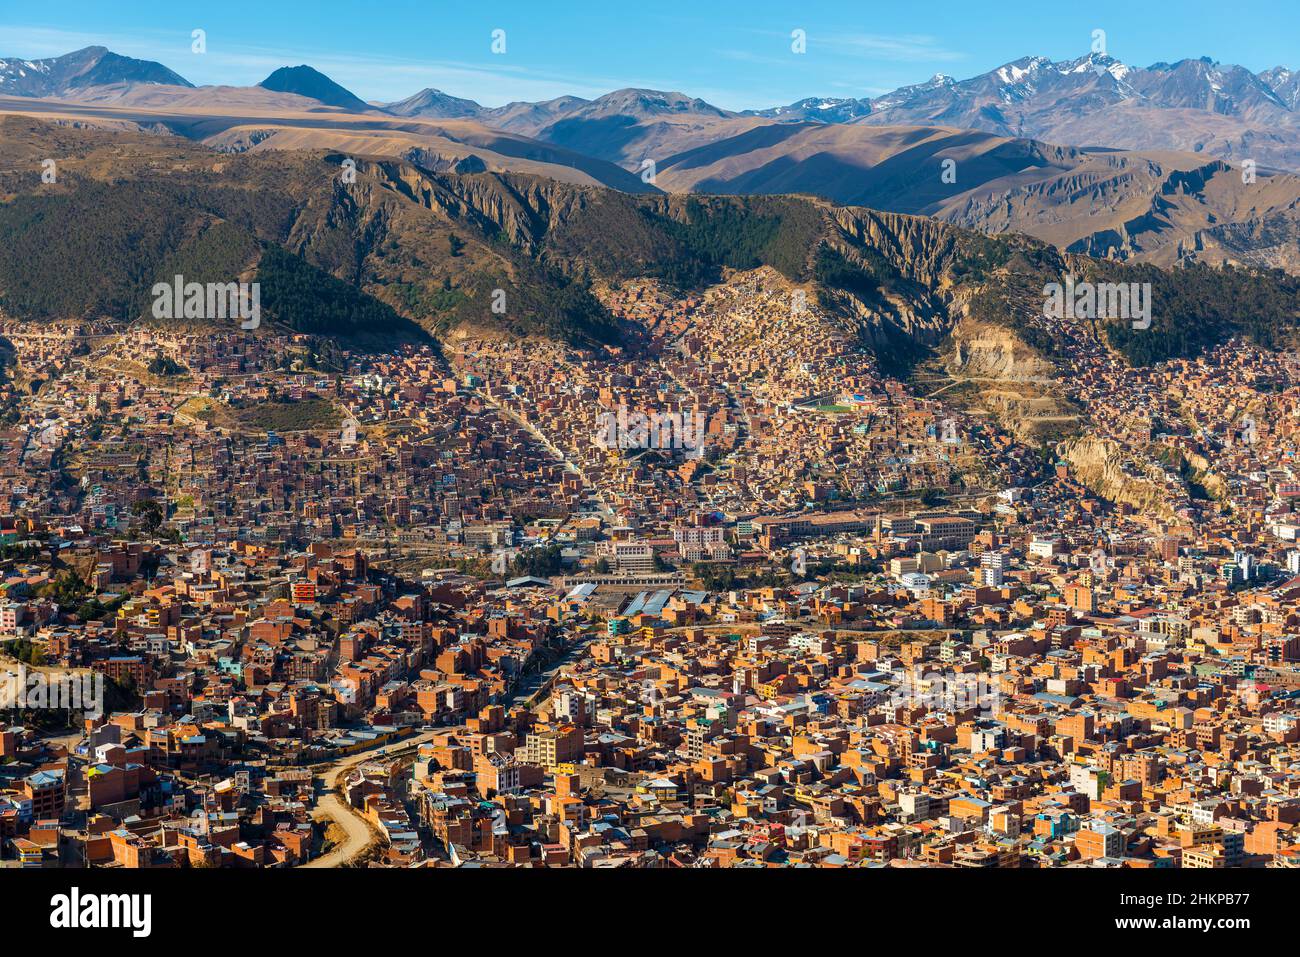 La Paz cityscape in the Andes mountains of Bolivia. Stock Photo